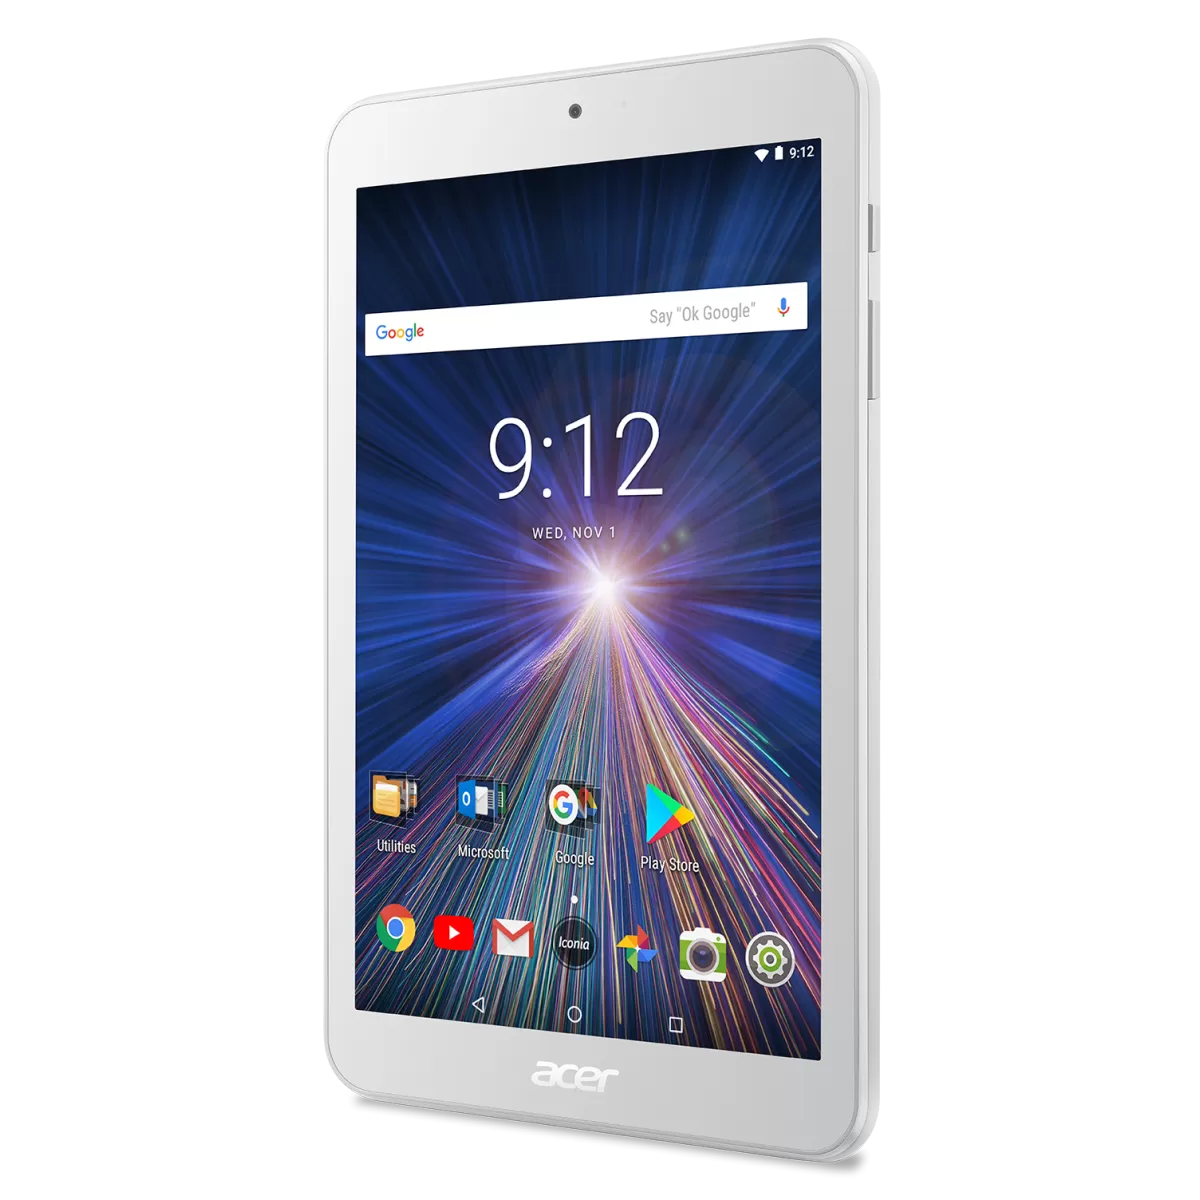 Таблет Tablet Acer Iconia B1870K3F9 (White) WiFi/8.0 WXGA IPS HD (1280x800) 16:10/MTK MT8167 quadcore Cortex A35 1.3 GHz/1GB/16GB eMMC/Cam 2.0 MP front, 5.0 MP rear/BT 4.0/GPS/Gsensor, Micro USB, microSD/1cell battery/Android 7.0 (Nougat)/White (rear cove